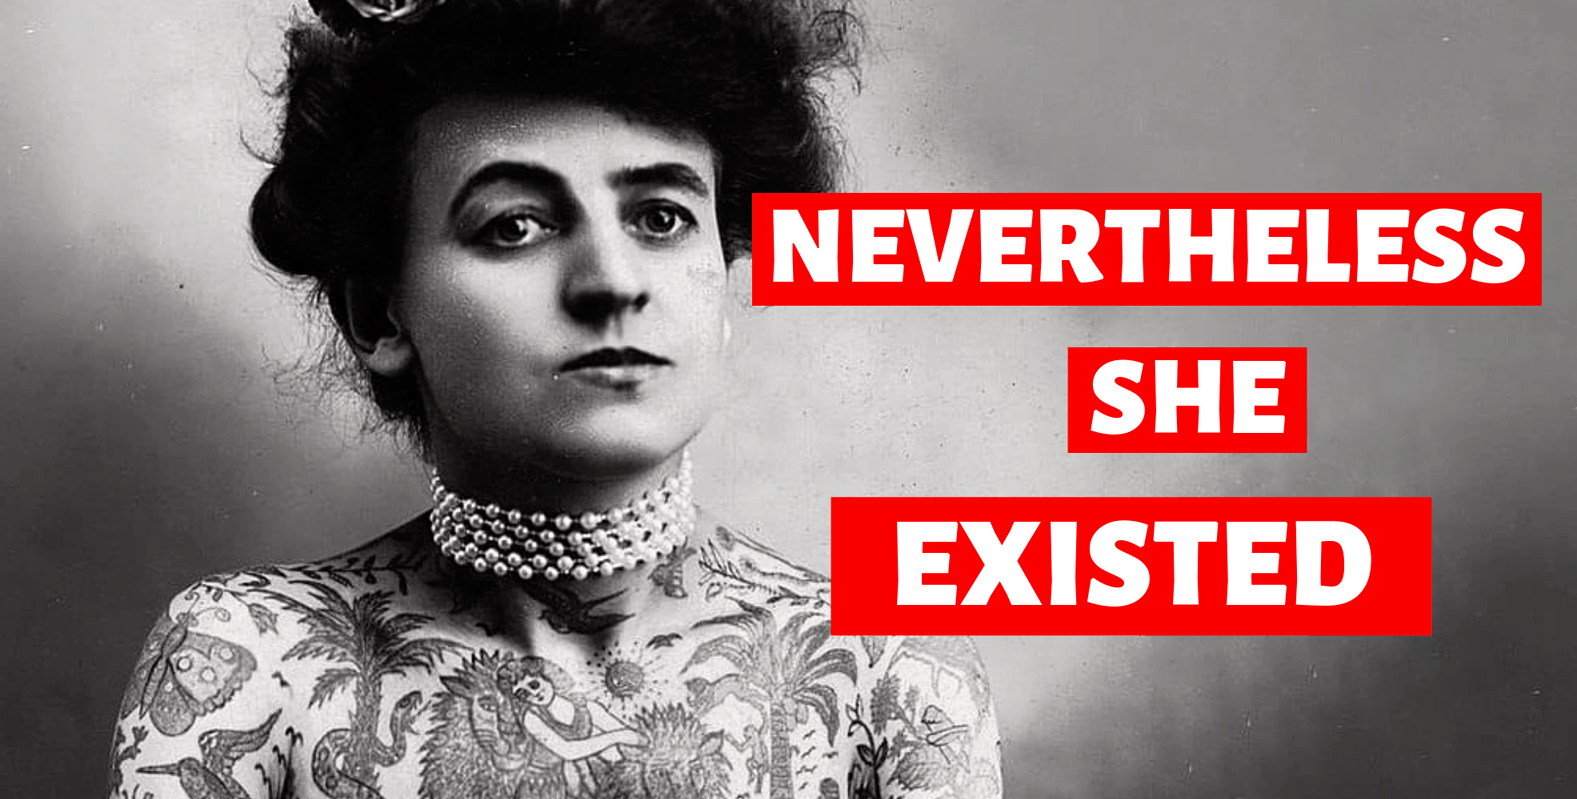 Molly Gaebe: "Nevertheless She Existed"